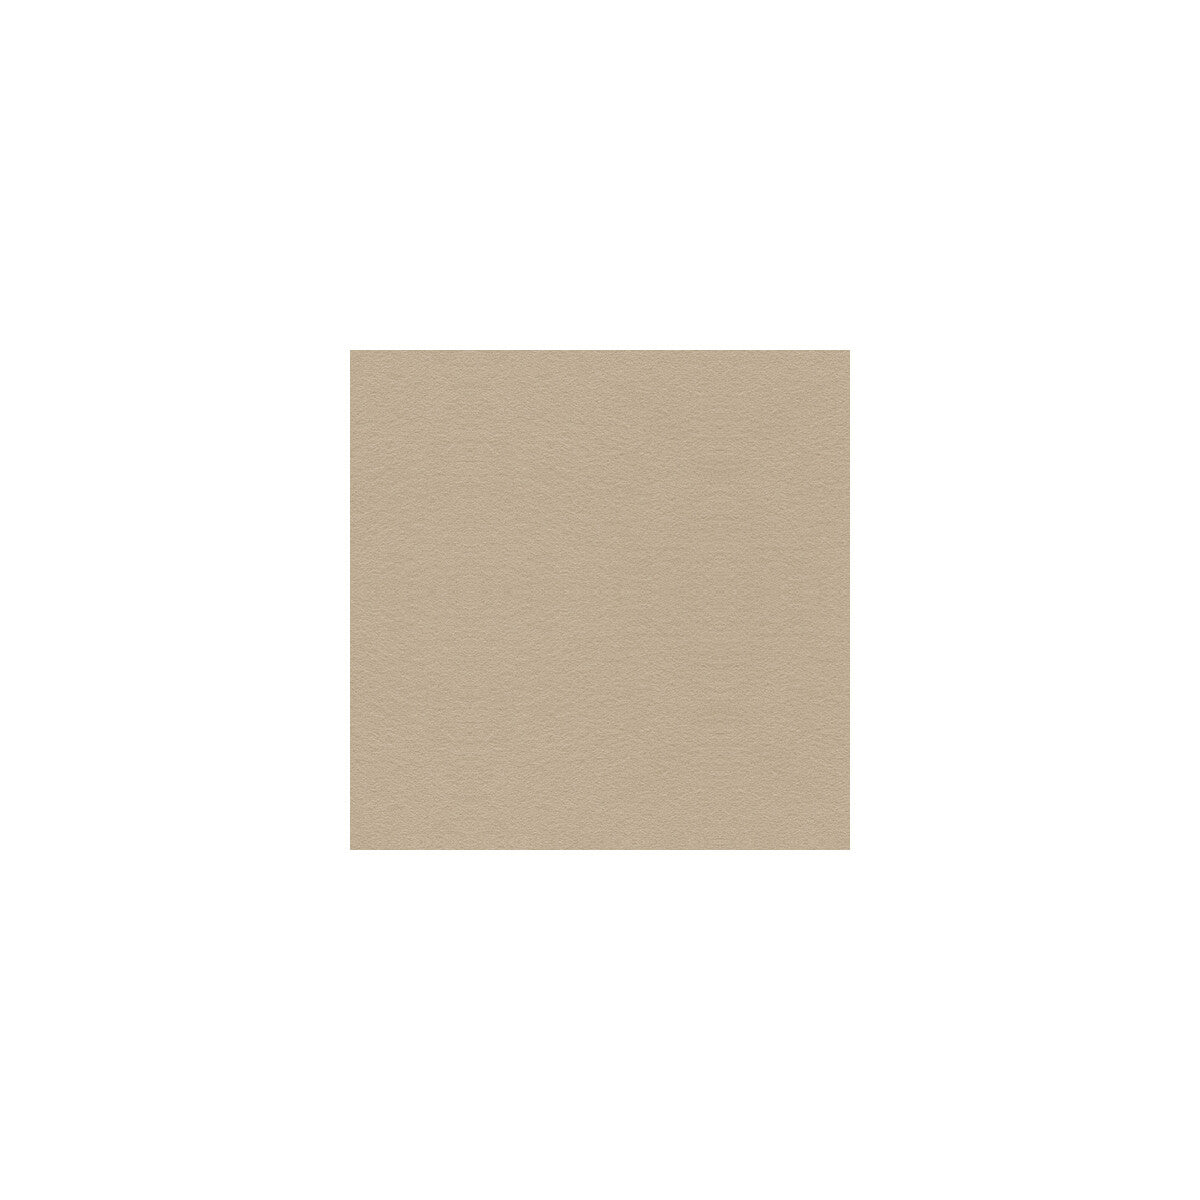 Ultimate fabric in taupe color - pattern 960122.1160.0 - by Lee Jofa in the Ultimate Suede collection